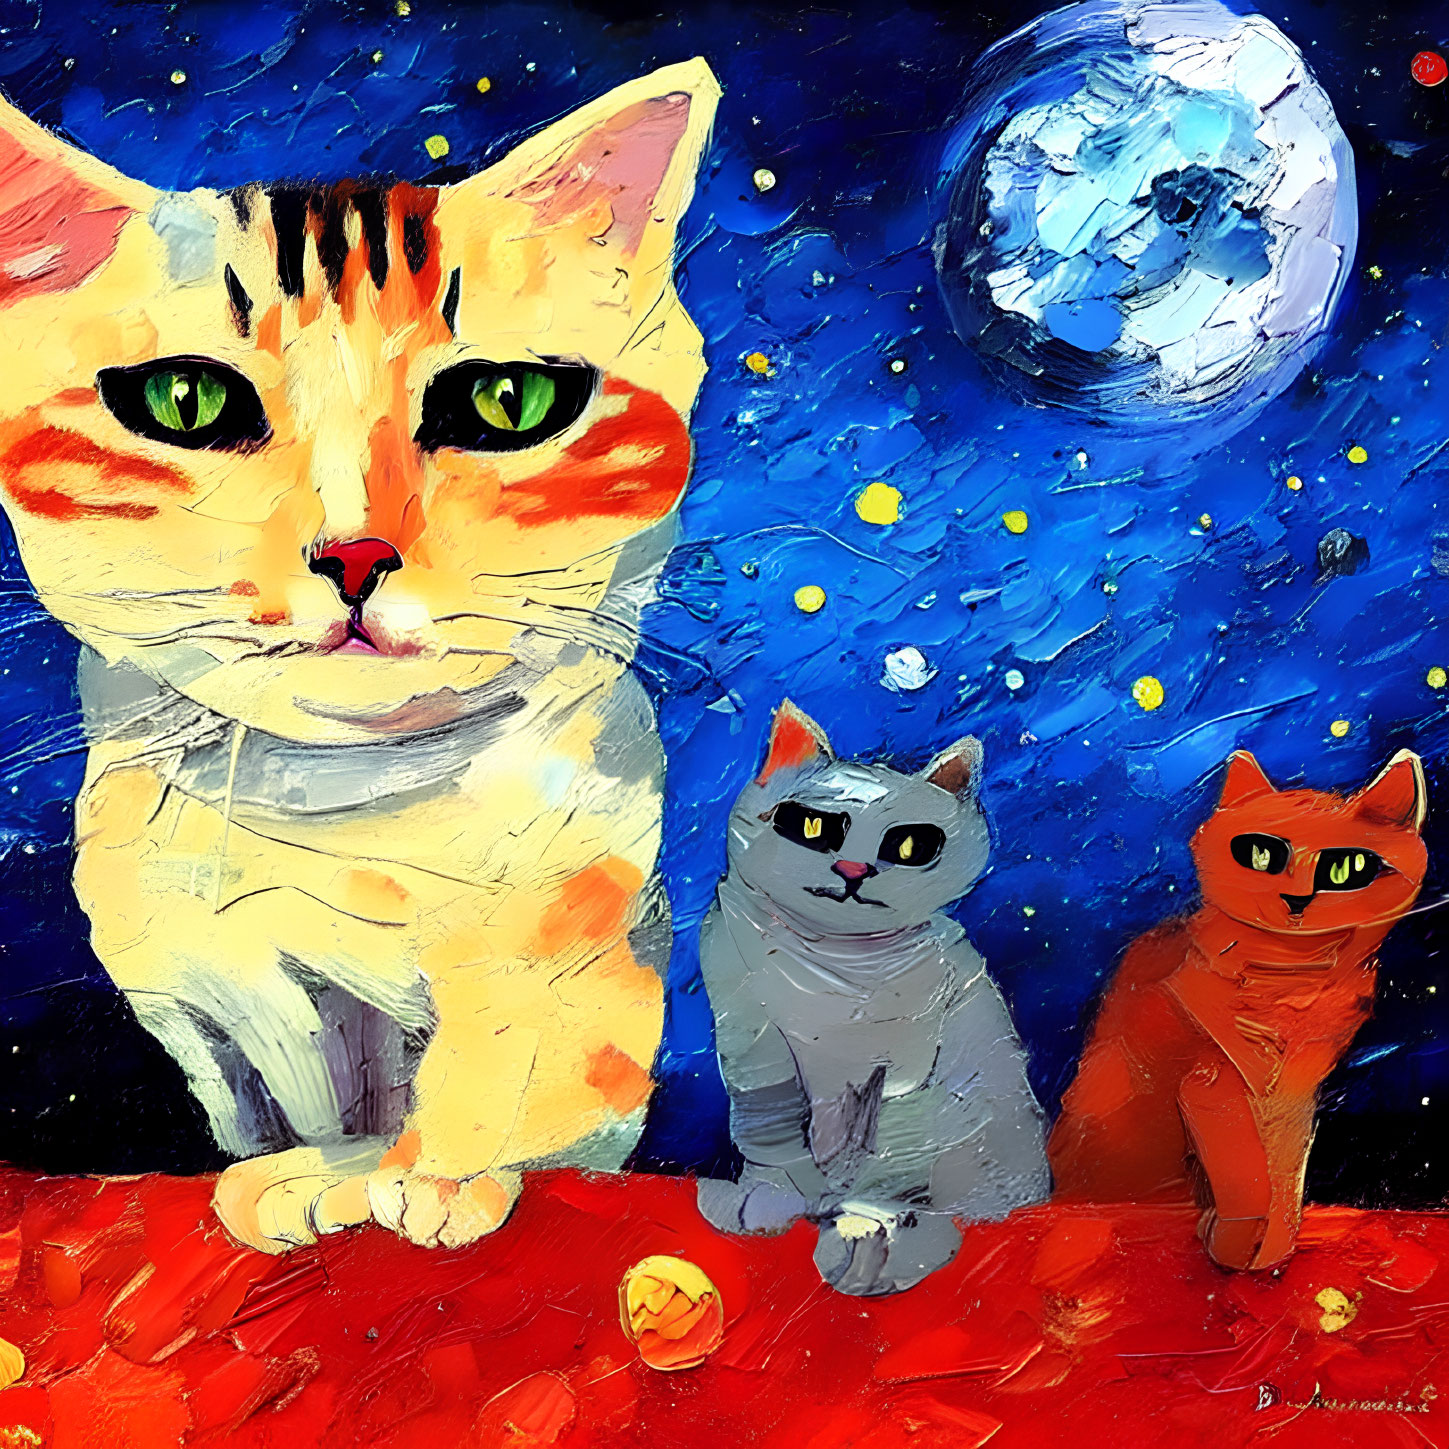 Stylized astronaut cats on Mars-like surface with moon and stars